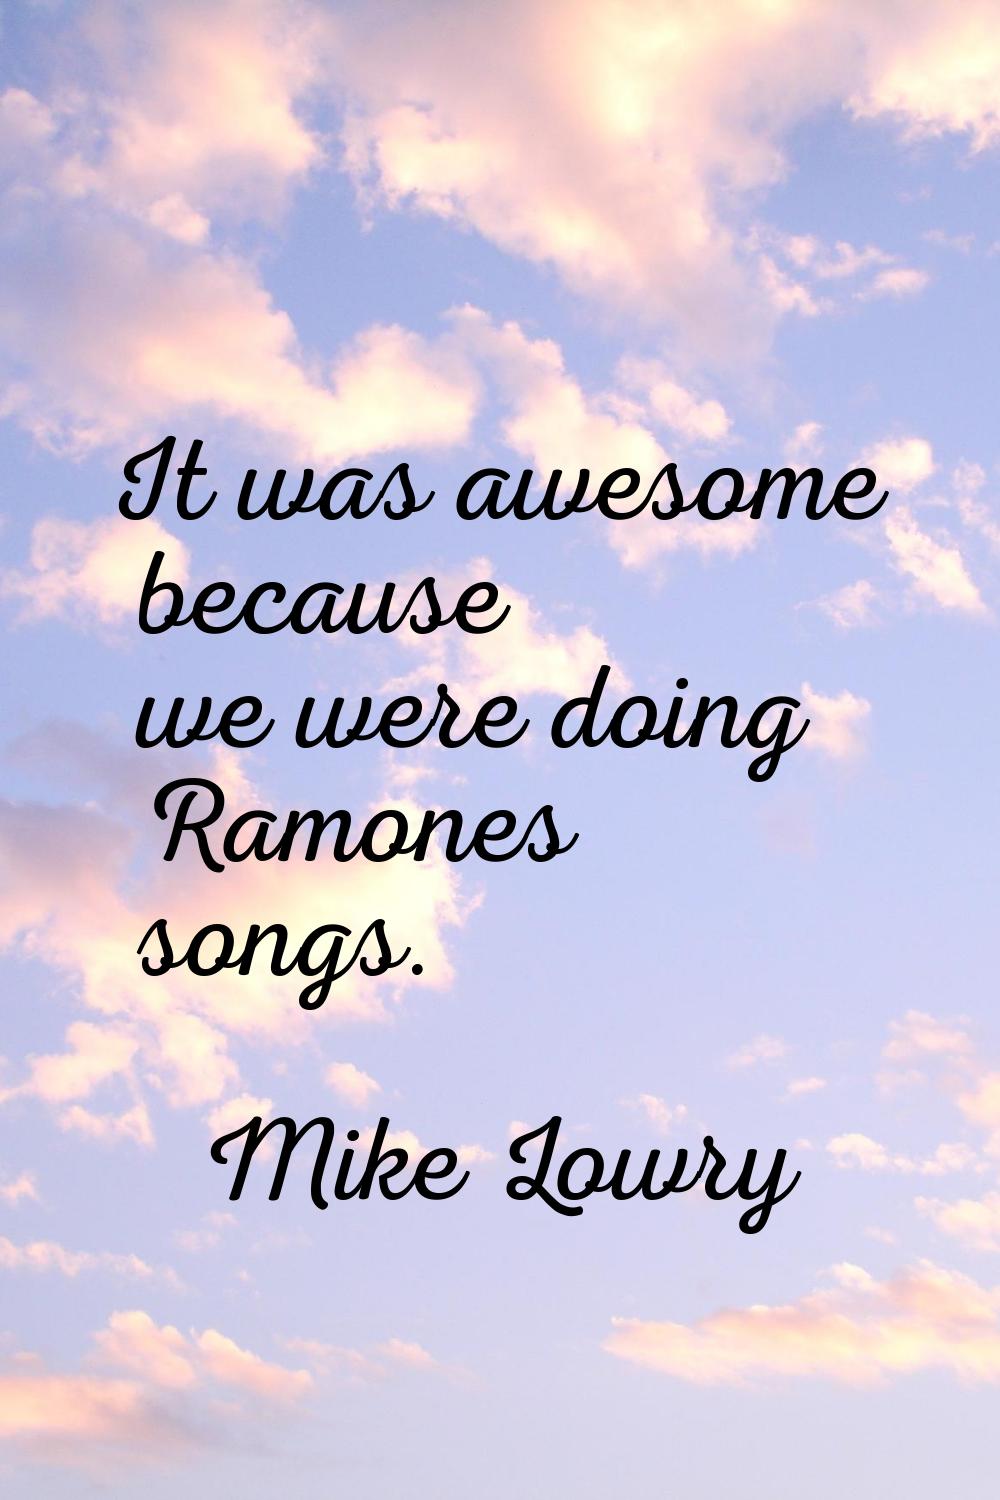 It was awesome because we were doing Ramones songs.